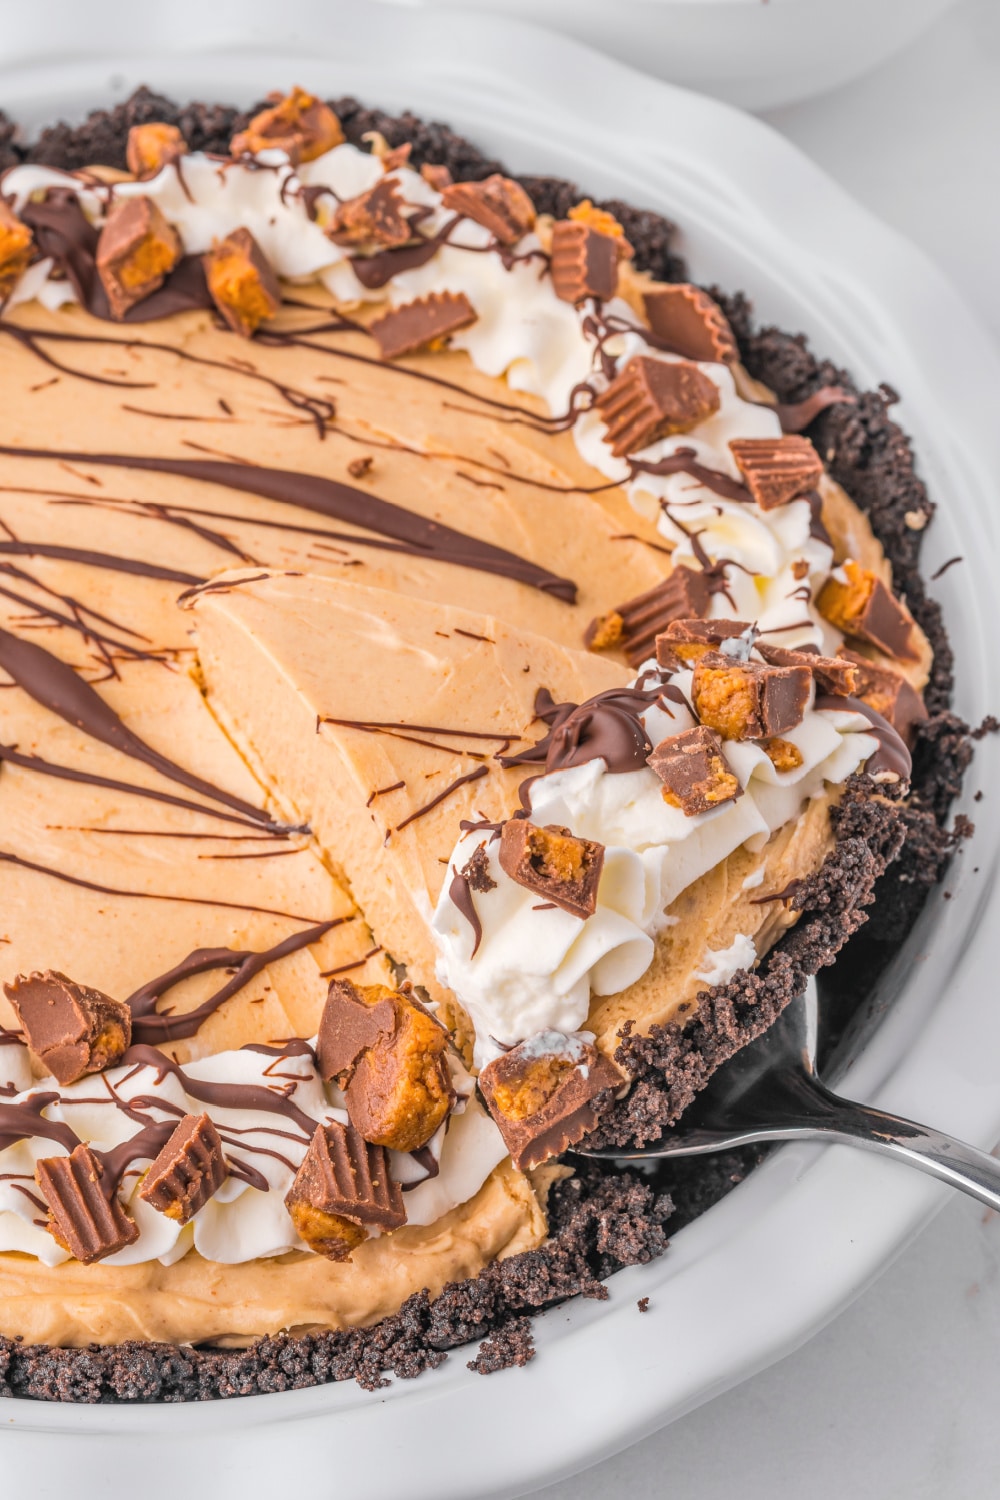 No Bake Peanut Butter Pie drizzled with chocolate syrup in a white pie plate.